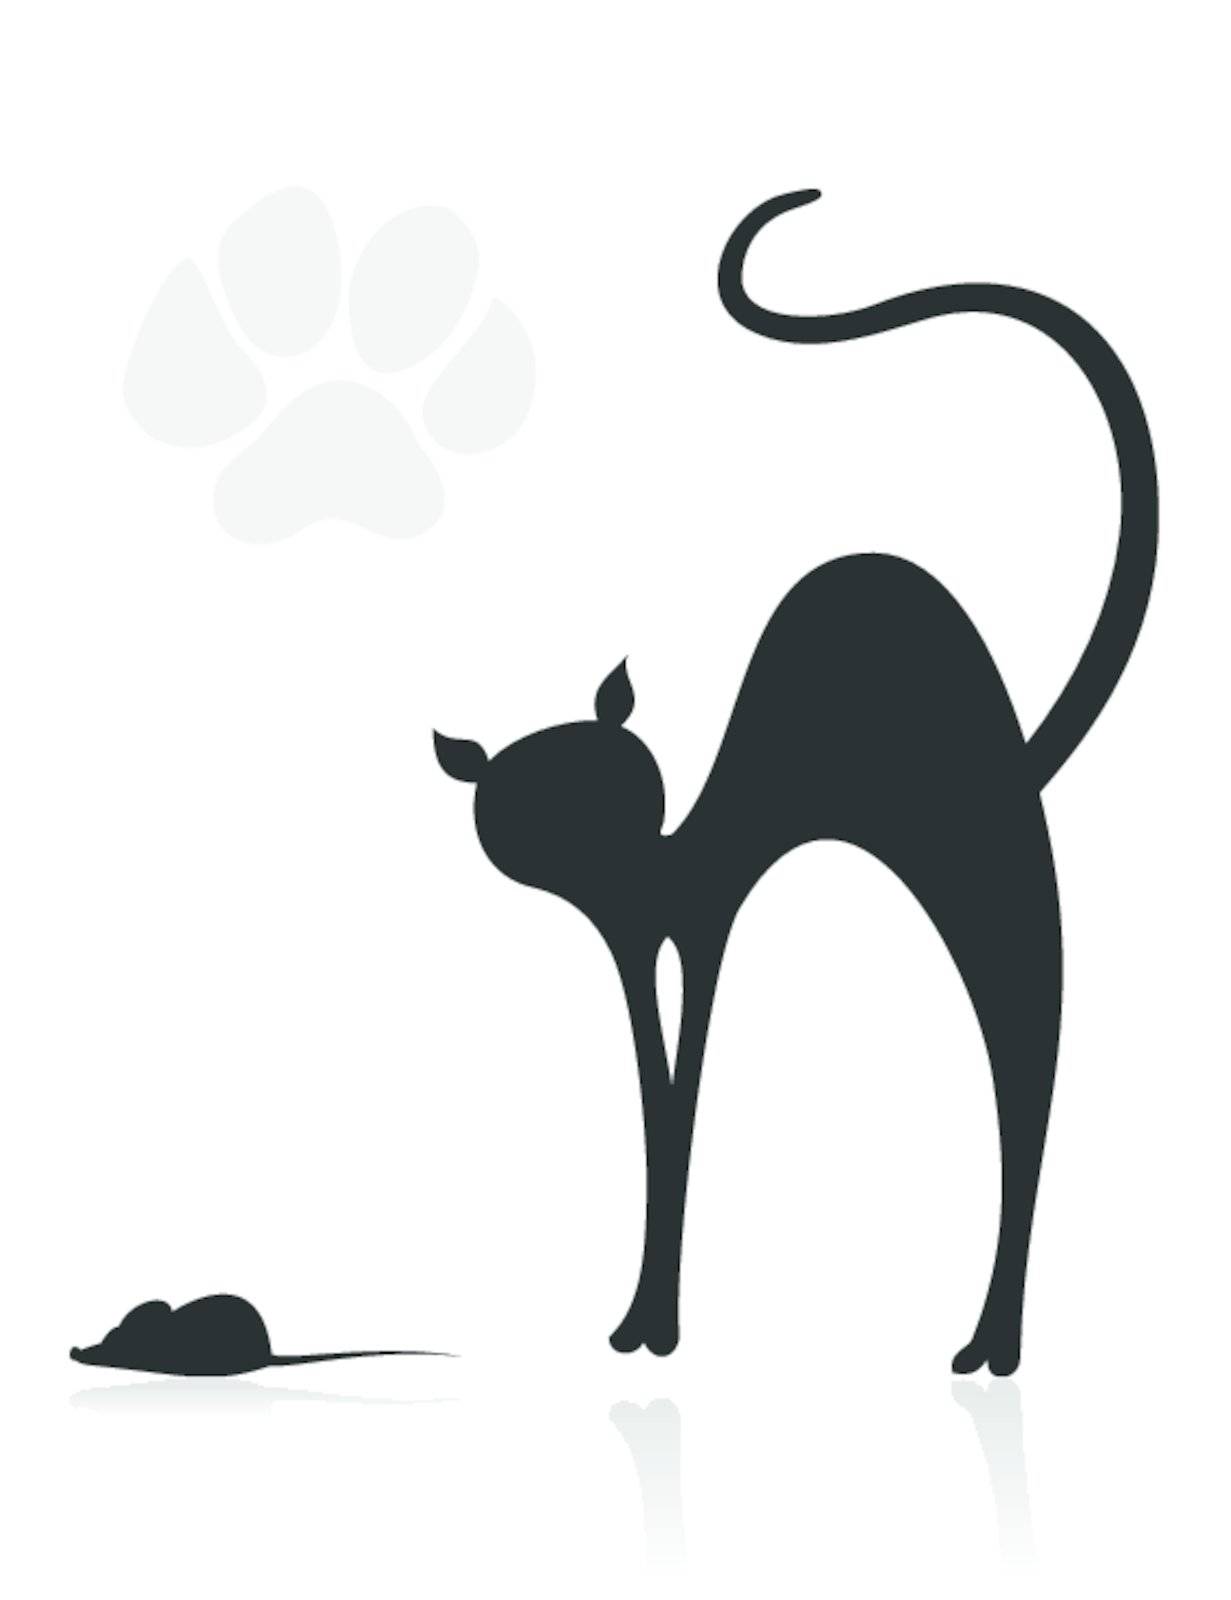 The black cat hunts on the mouse. A vector illustration